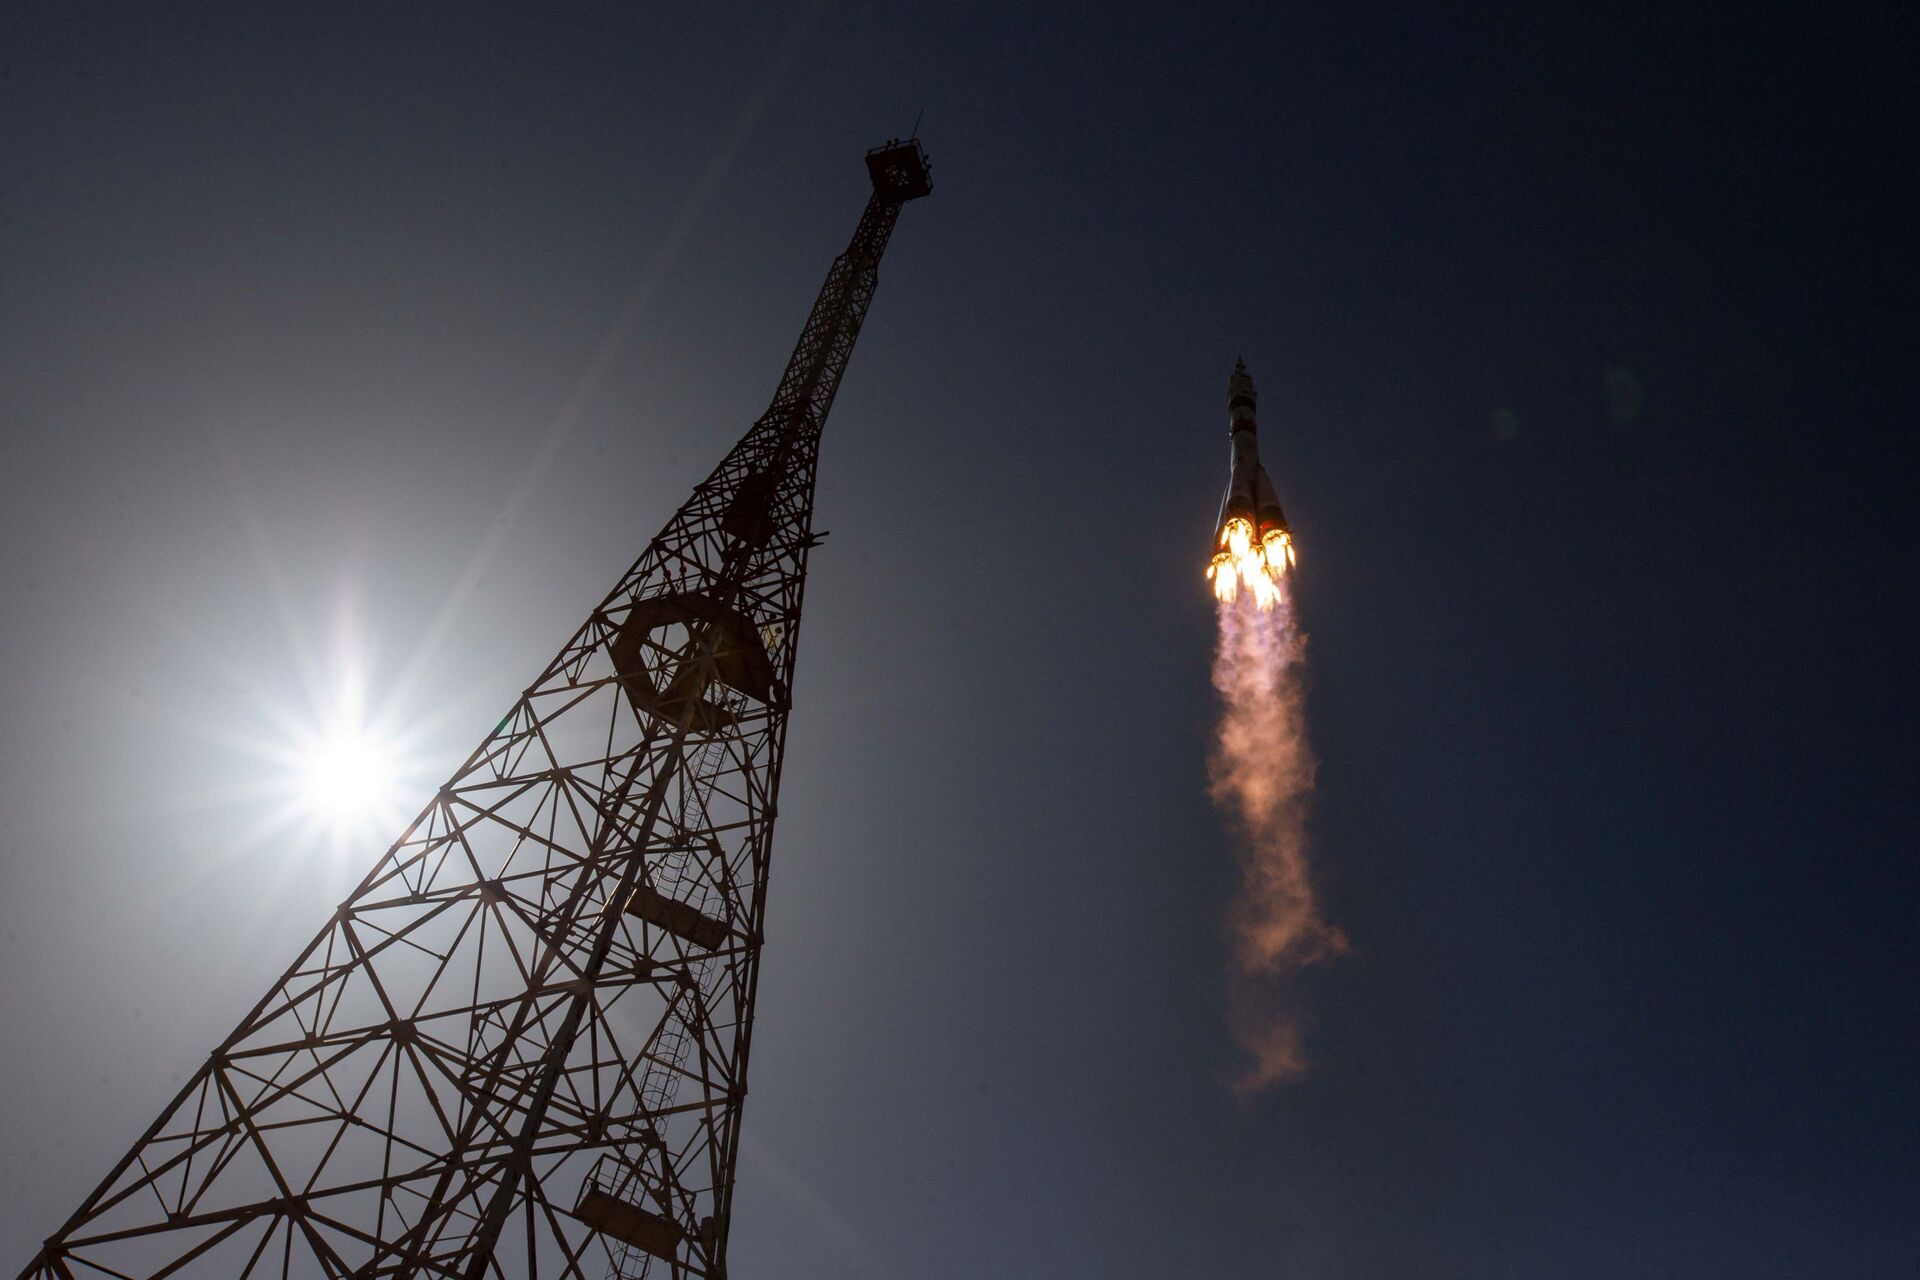 The Soyuz MS-18 spacecraft carrying the crew formed of Mark Vande Hei of NASA and cosmonauts Oleg Novitskiy and Pyotr Dubrov of Roscosmos blasts off to the International Space Station (ISS) from the launchpad at the Baikonur Cosmodrome, Kazakhstan April 9, 2021. - Sputnik International, 1920, 07.09.2021